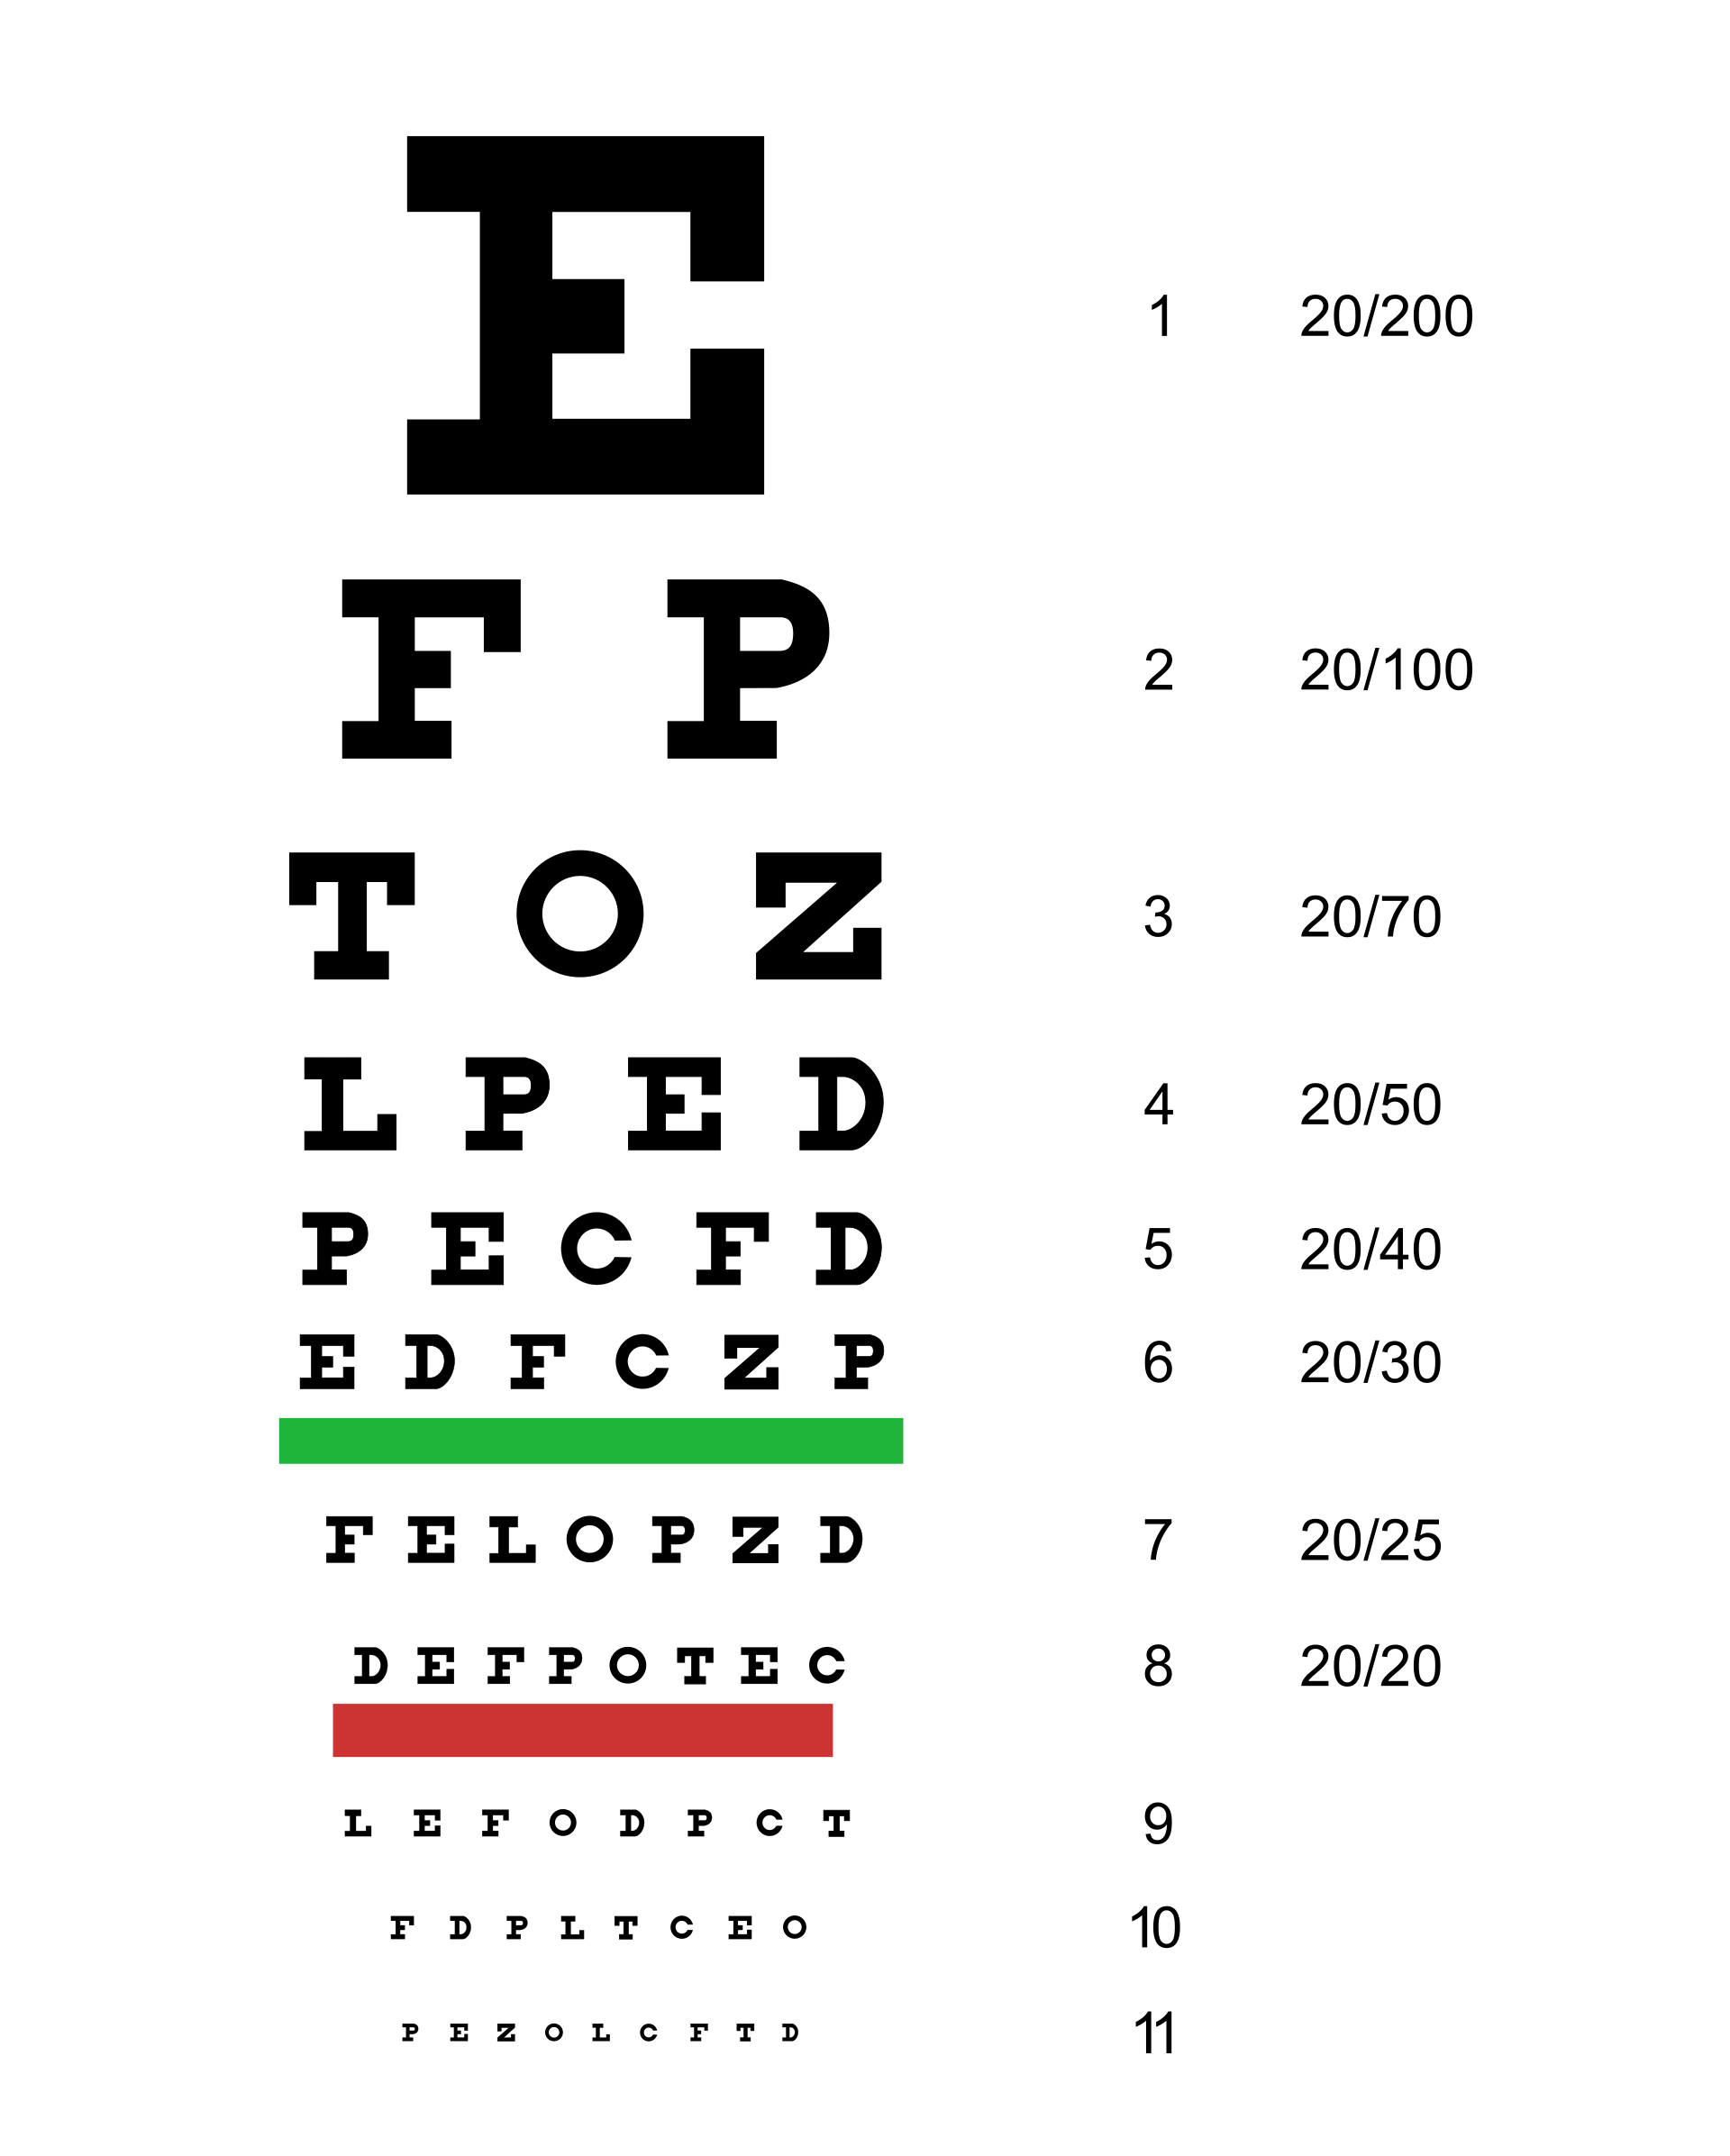 An example of a Snellen Chart commonly used for visual acuity testing. A red line highlights 20/20 vision. A green line highlights 20/30 vision.